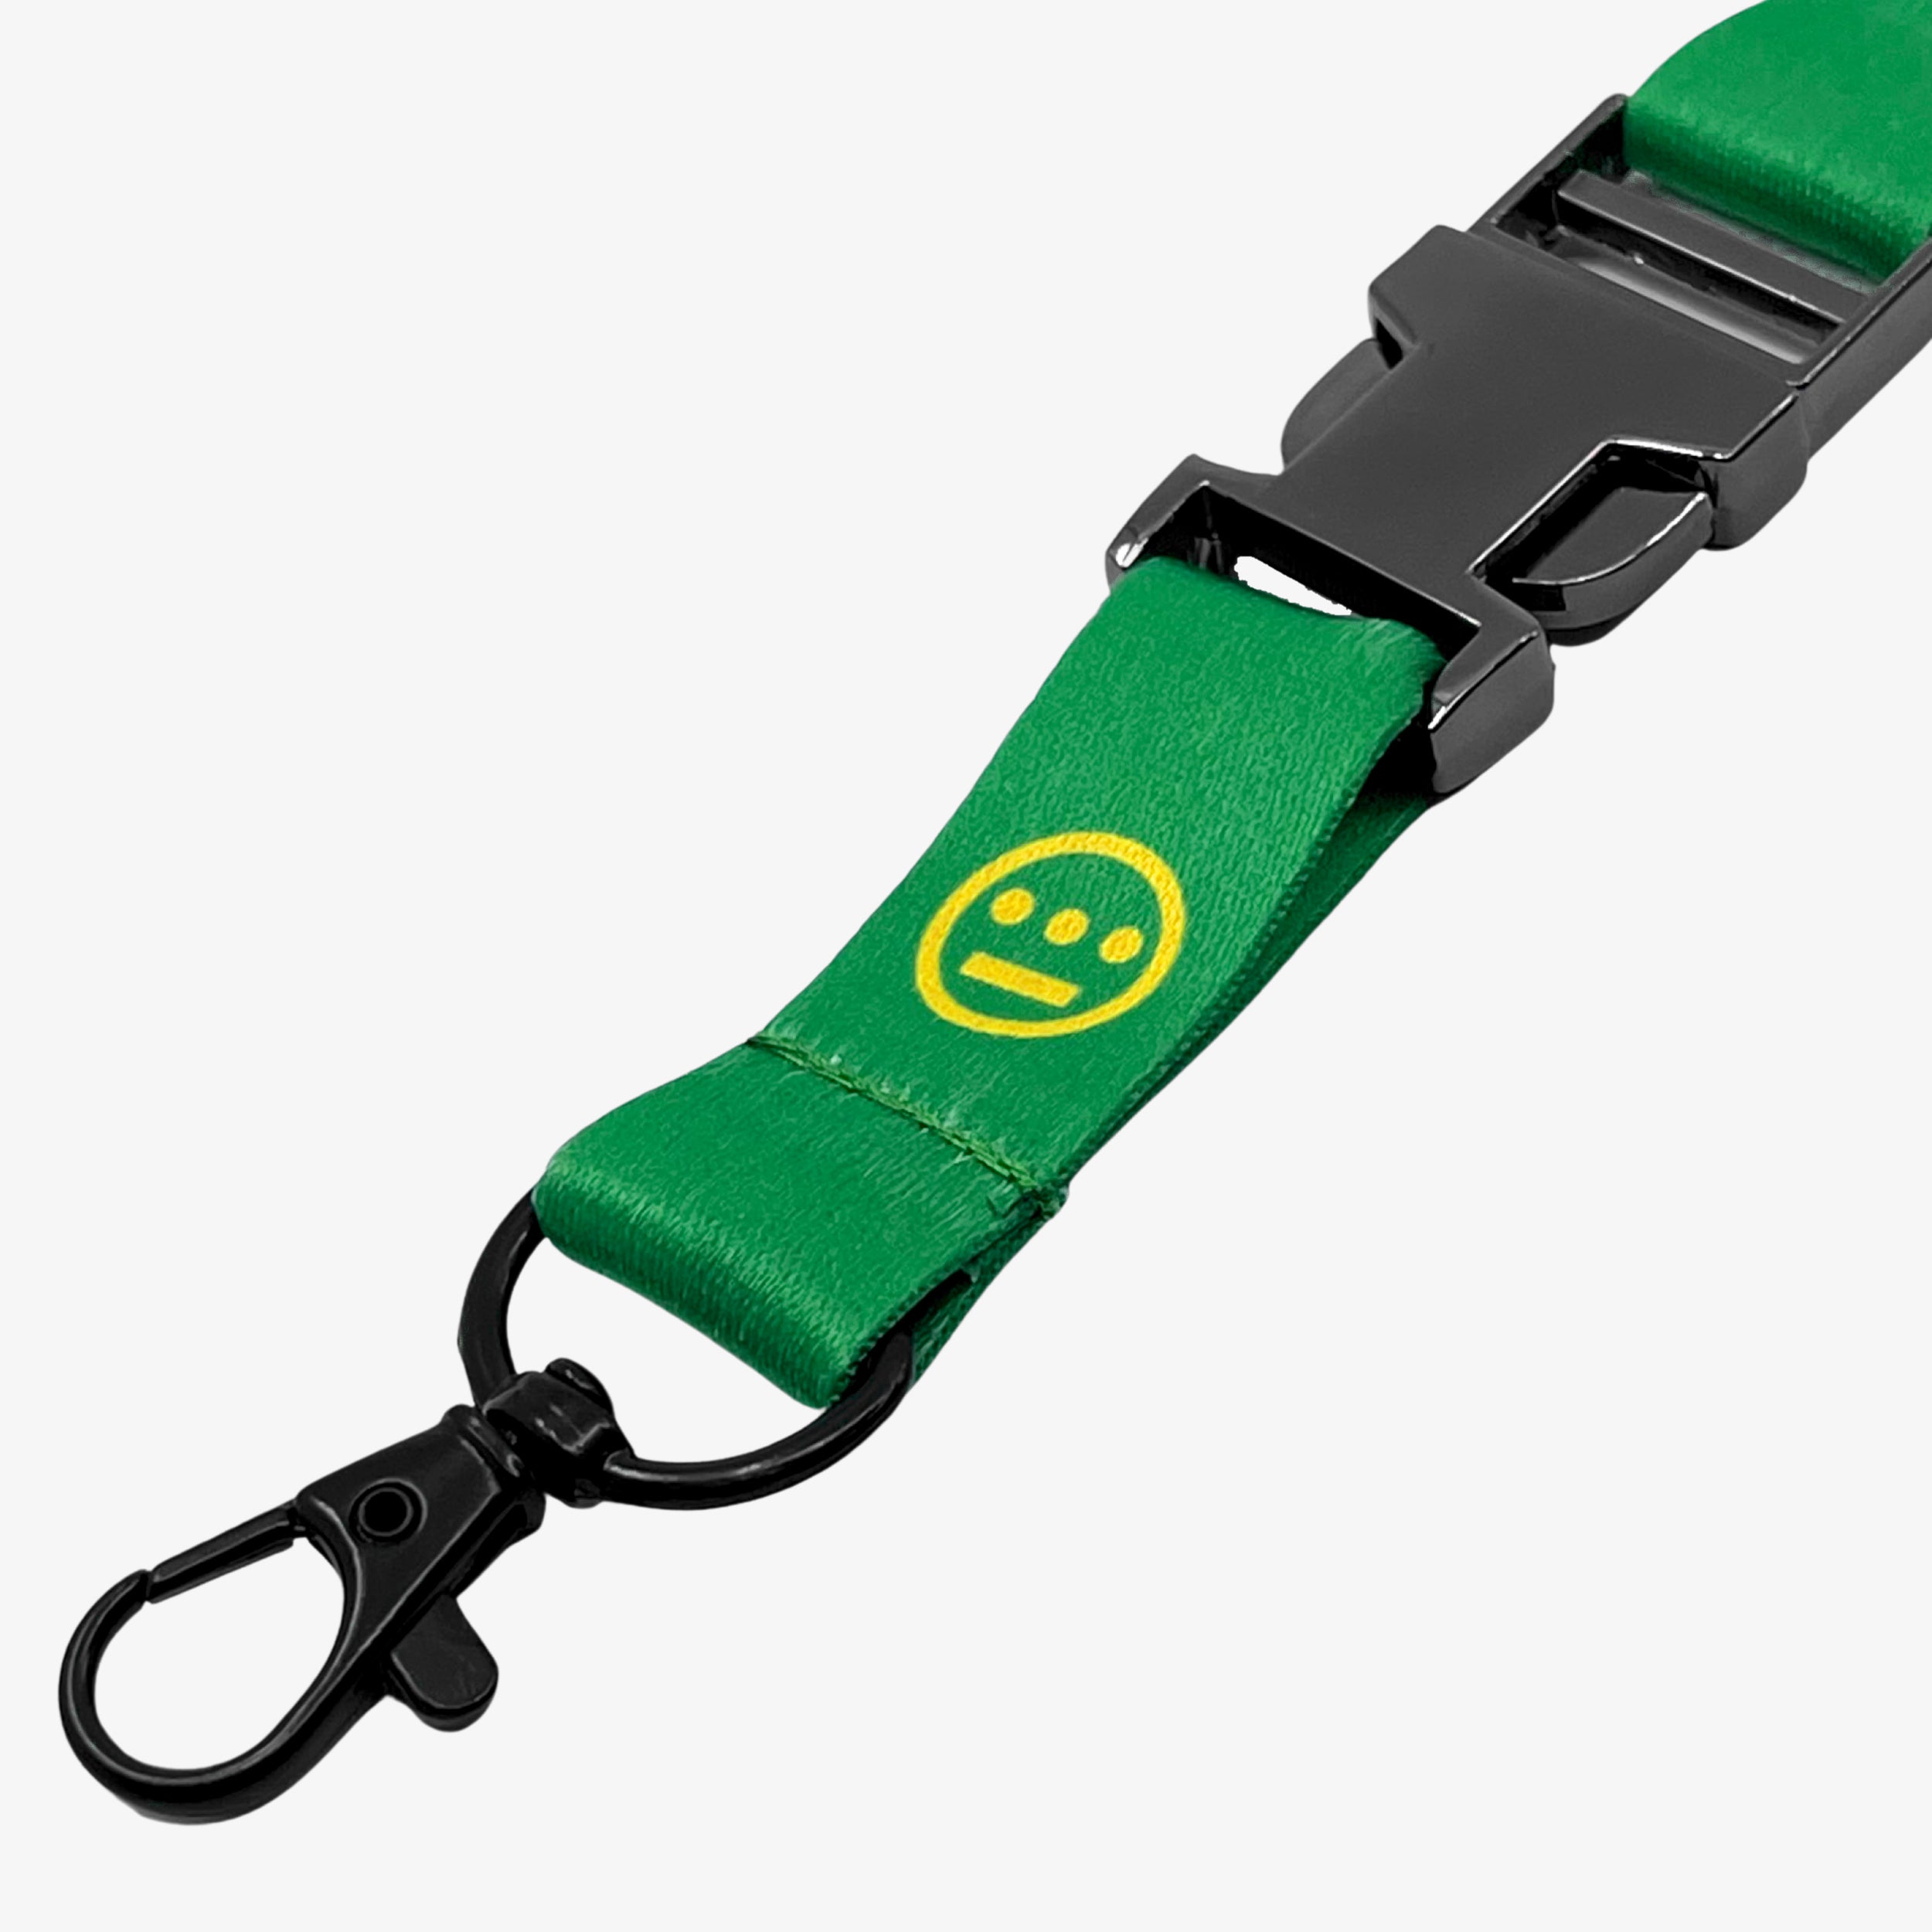 Close-up of quick release clasp on a green lanyard with yellow Hiero hip-hop logo.